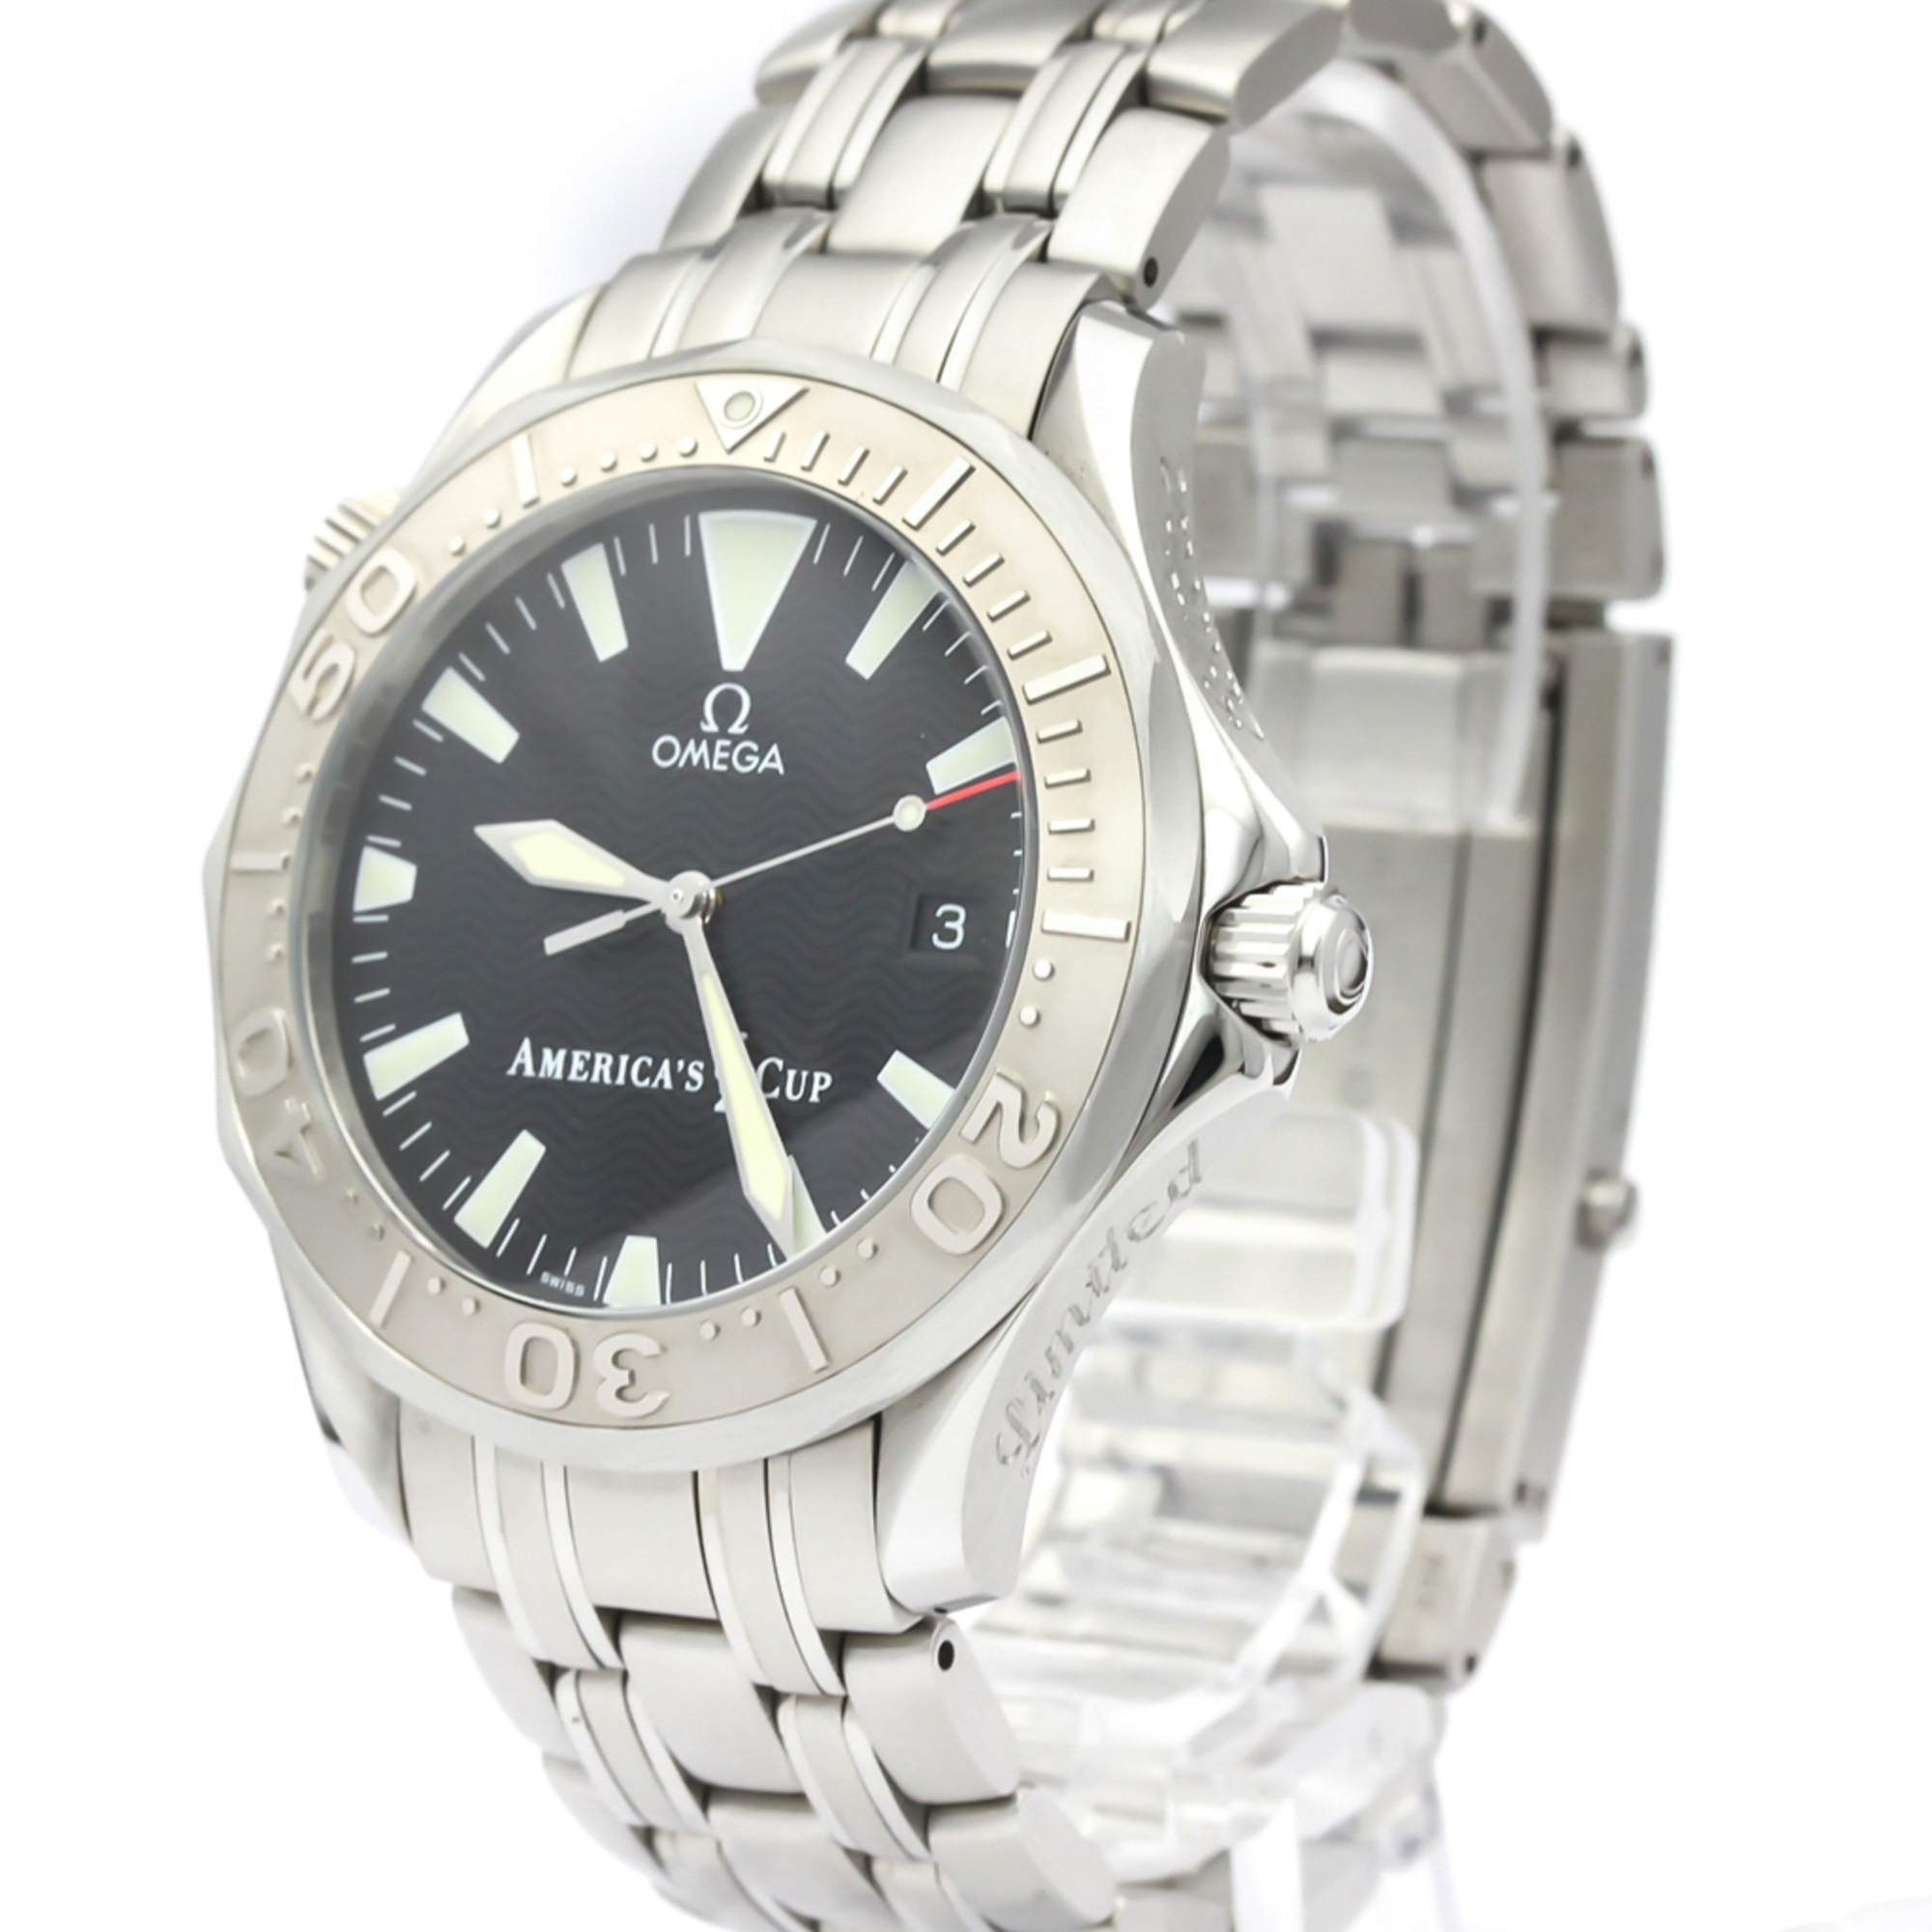 Omega Seamaster Automatic Stainless Steel,White Gold (18K) Men's Sports Watch 2533.50